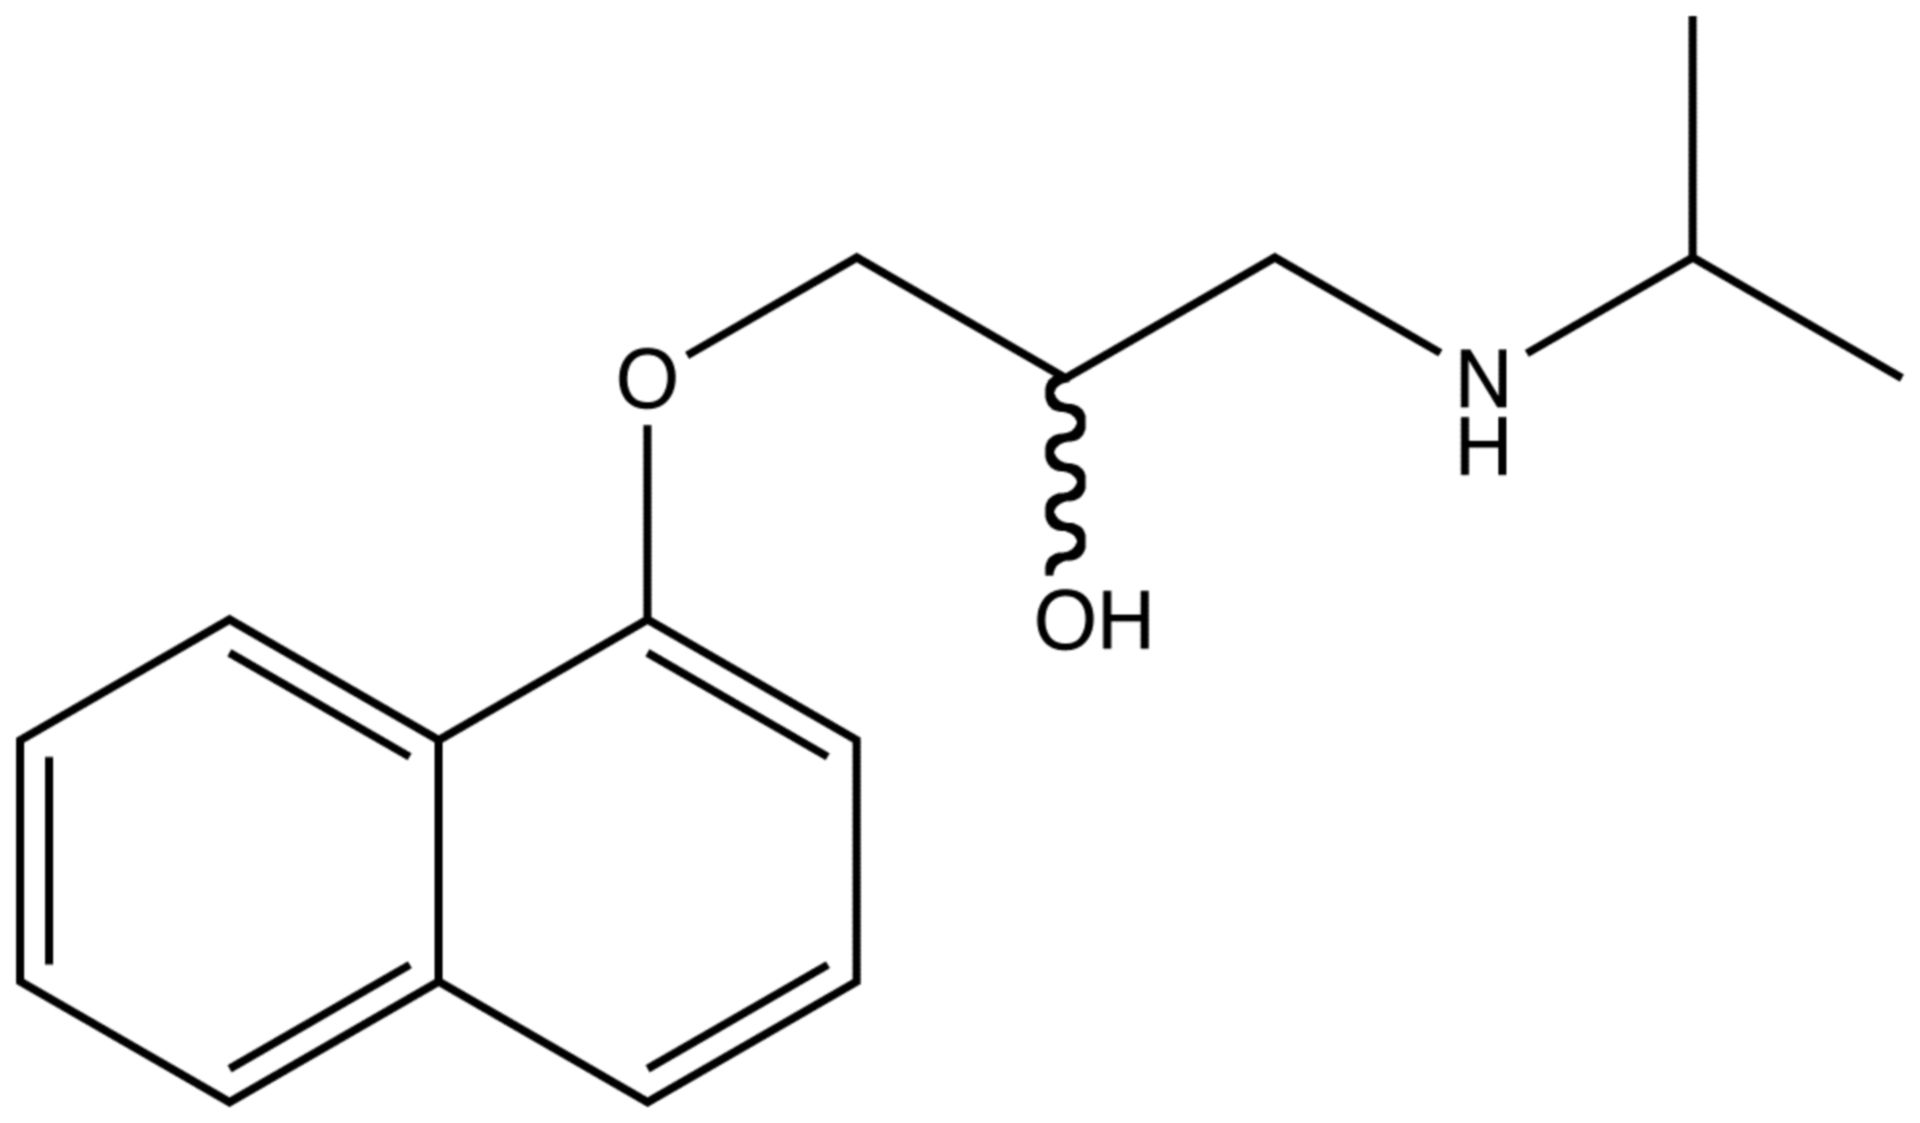 Structural Formula of Propanolol